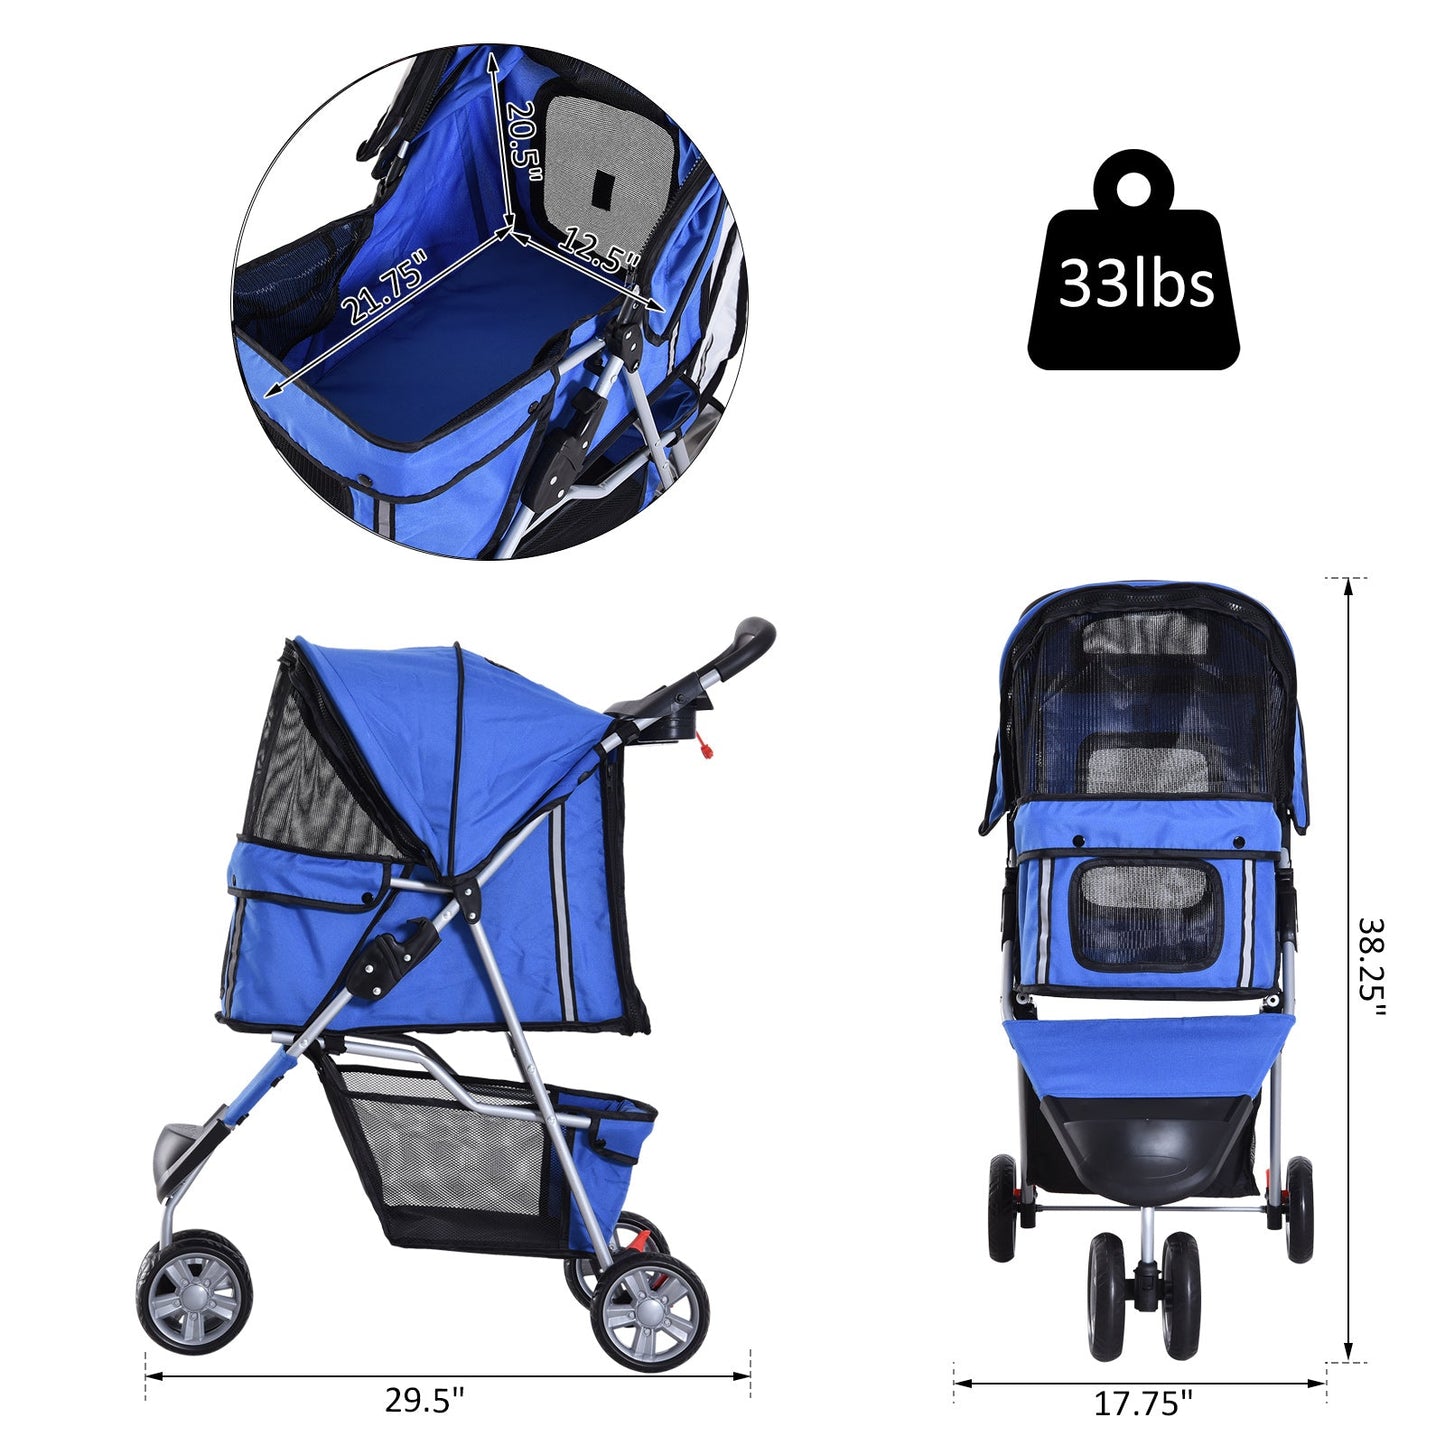 Deluxe 3 Wheels Pet Stroller Foldable Dog Cat Carrier Strolling Jogger with Brake, Canopy, Cup Holders and Bottom Storage Space (Blue) at Gallery Canada